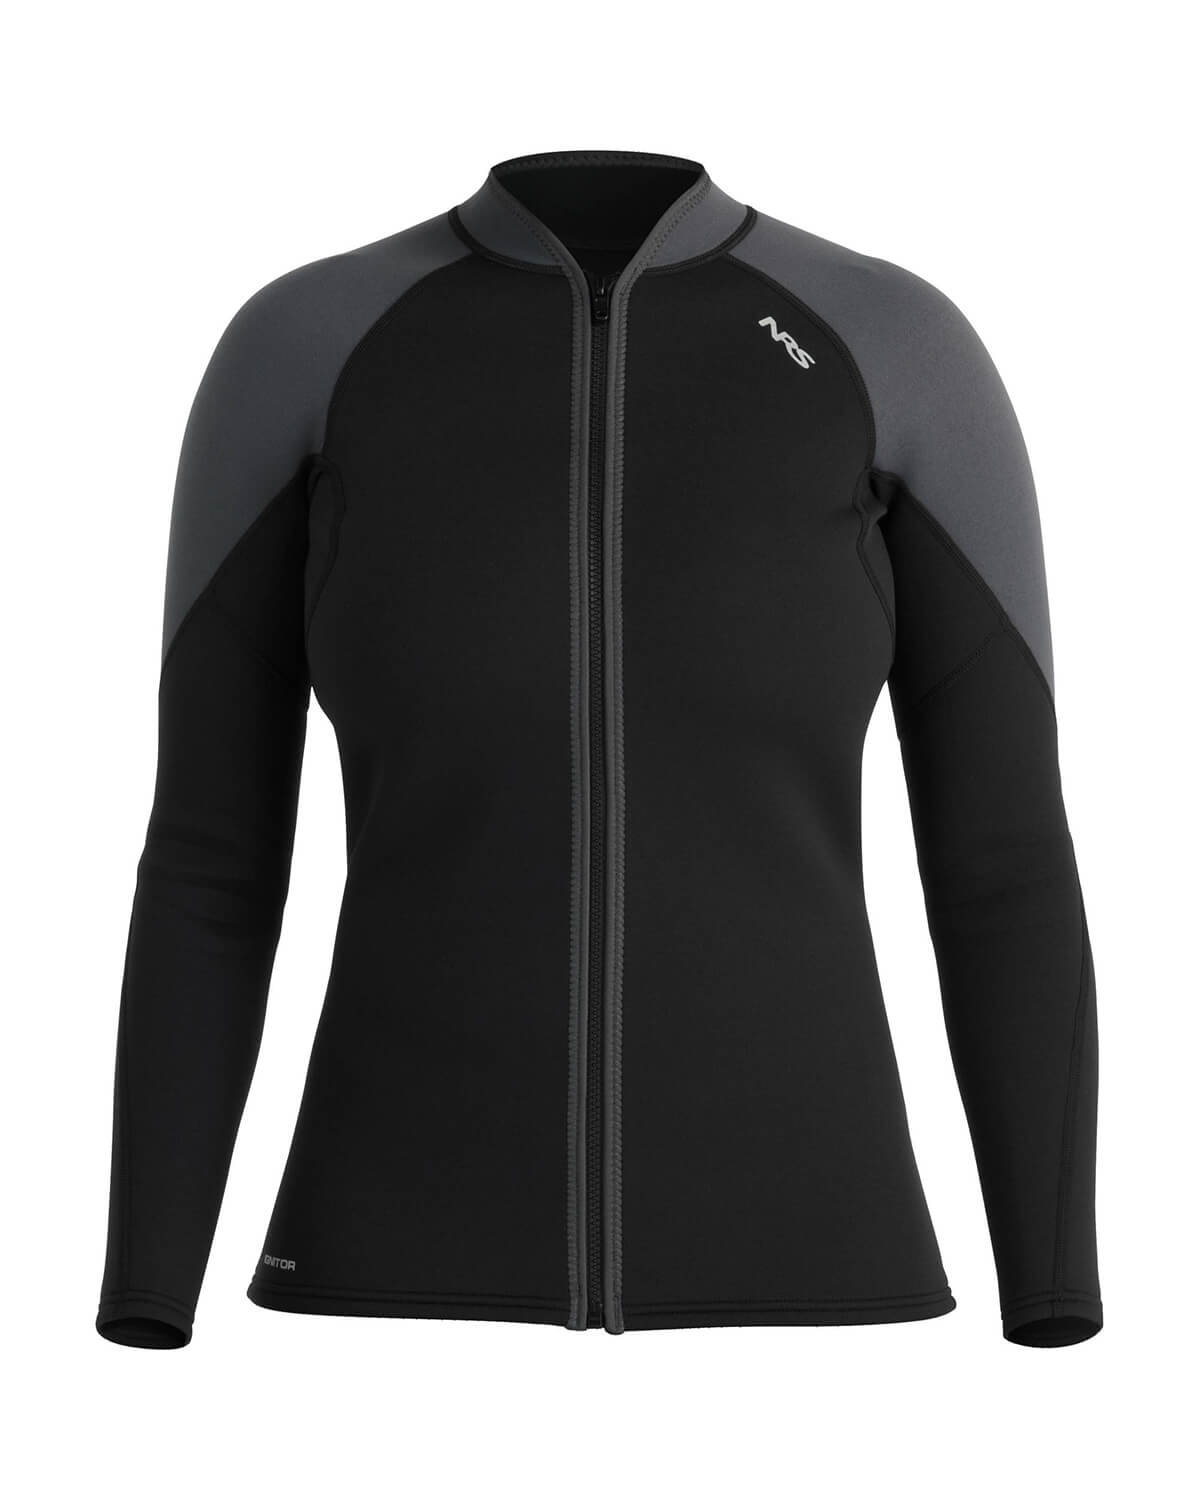 2mm Women's NRS IGNITOR Wetsuit Jacket